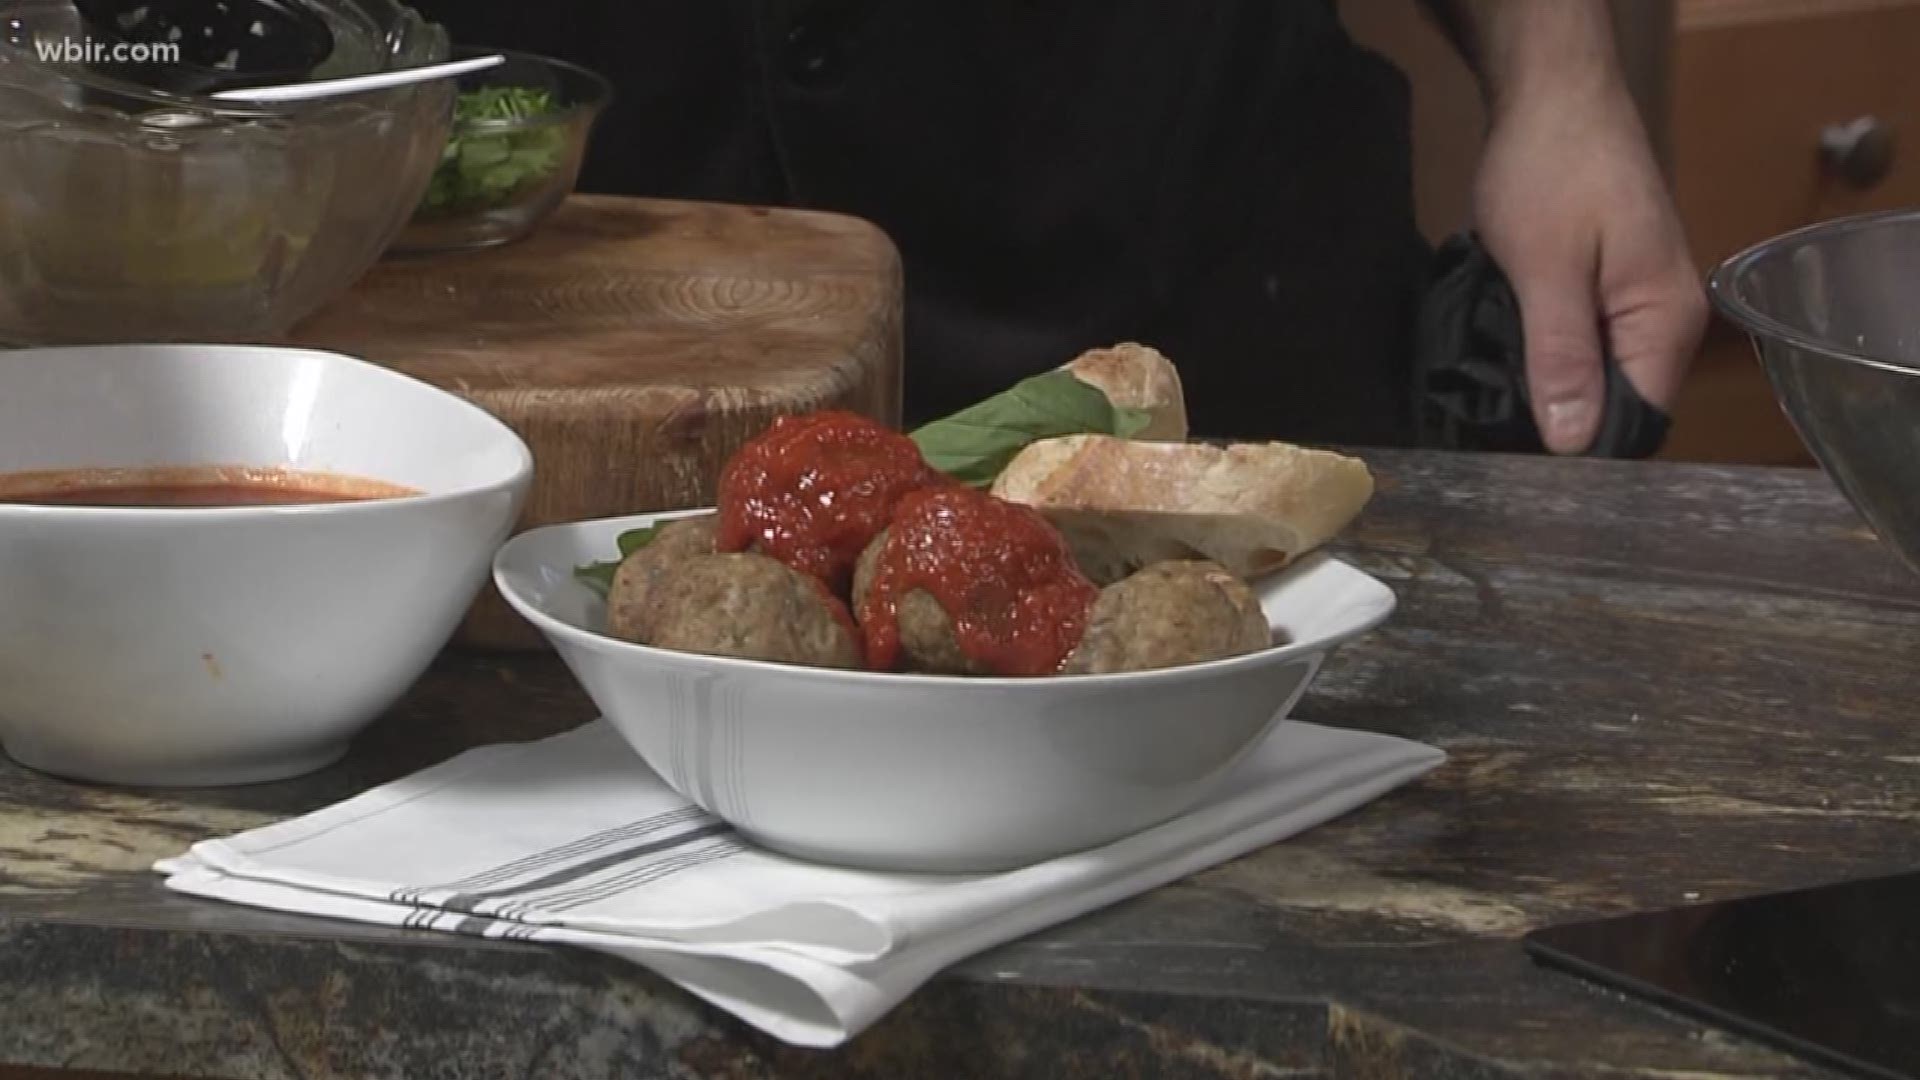 Chef Frank Aloise from Cappuccino's is here cooking up his mamma's meatballs for National Meatball Day.